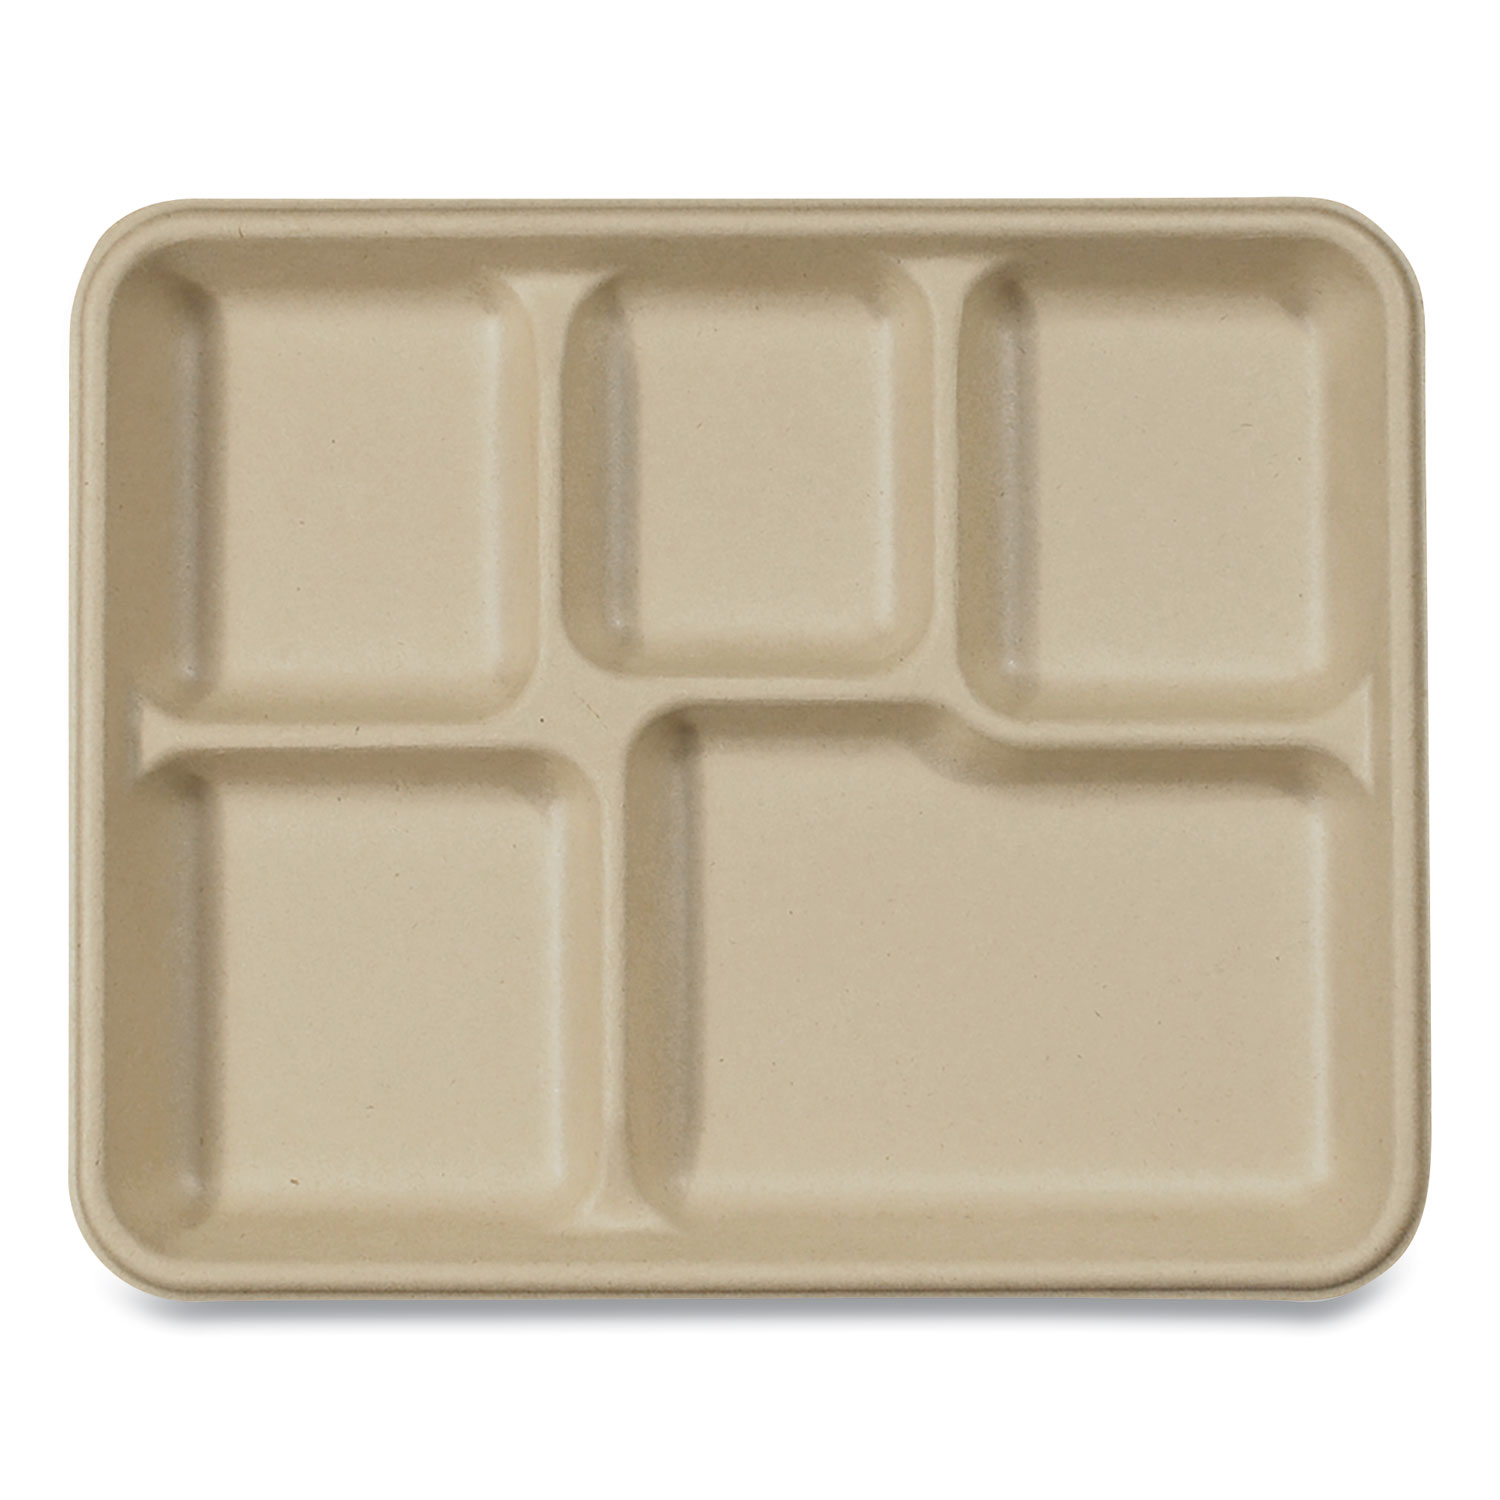 World Centric® Fiber Trays, School Tray with Five-Compartments, 10.5 x 8.5 x 1, Natural, 400/Carton